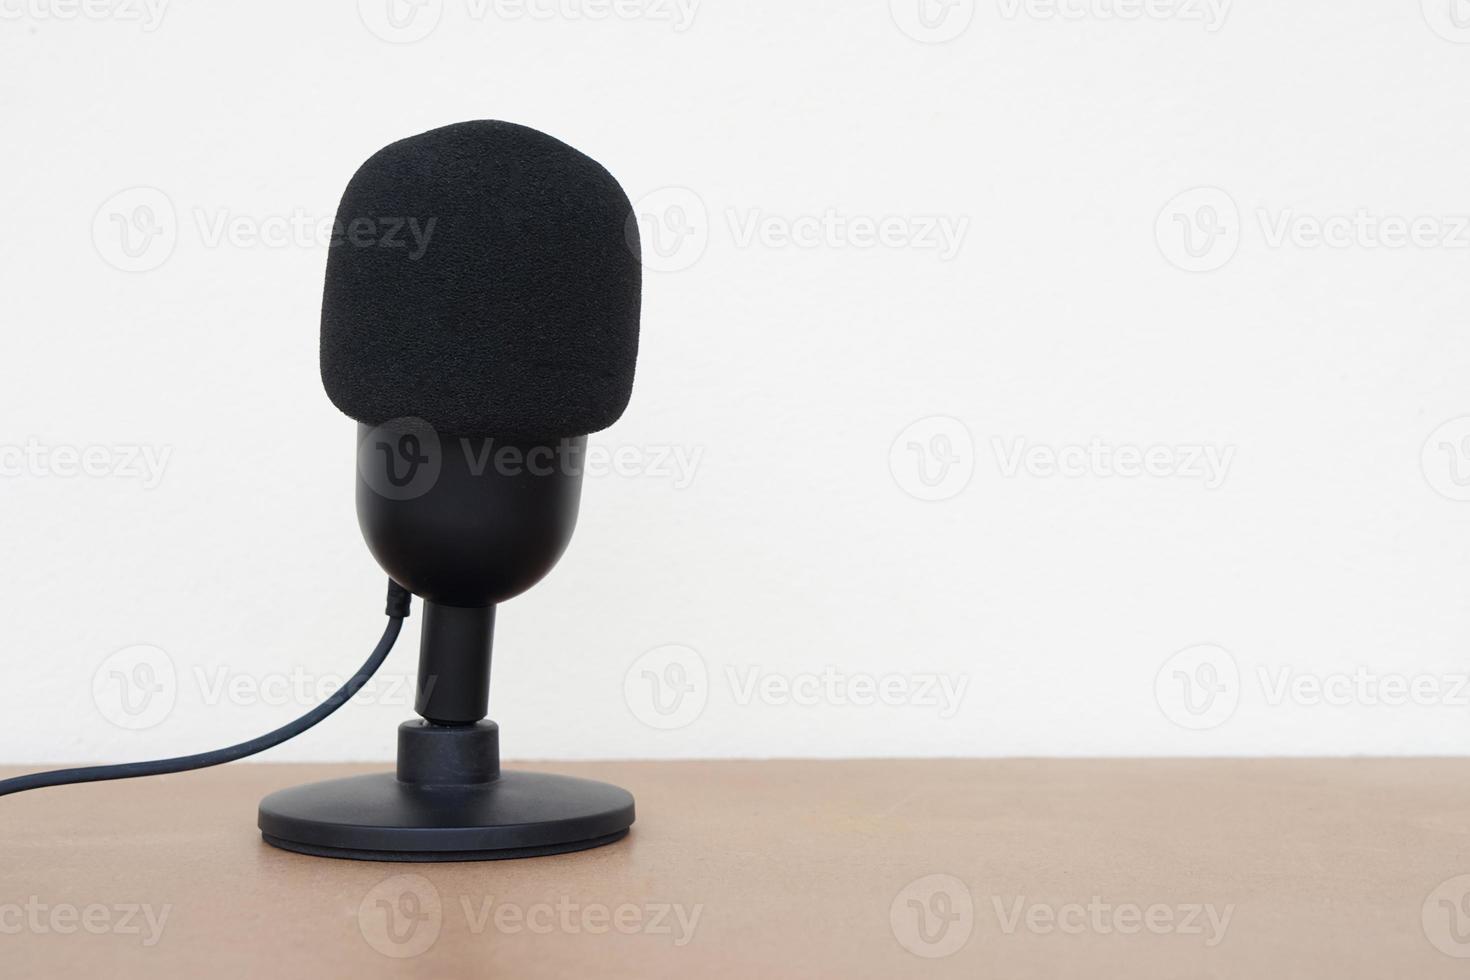 Black microphone. Concept, technology device, microphone usb, useful for sound, voice recording, live streaming. On air, broadcasting. photo